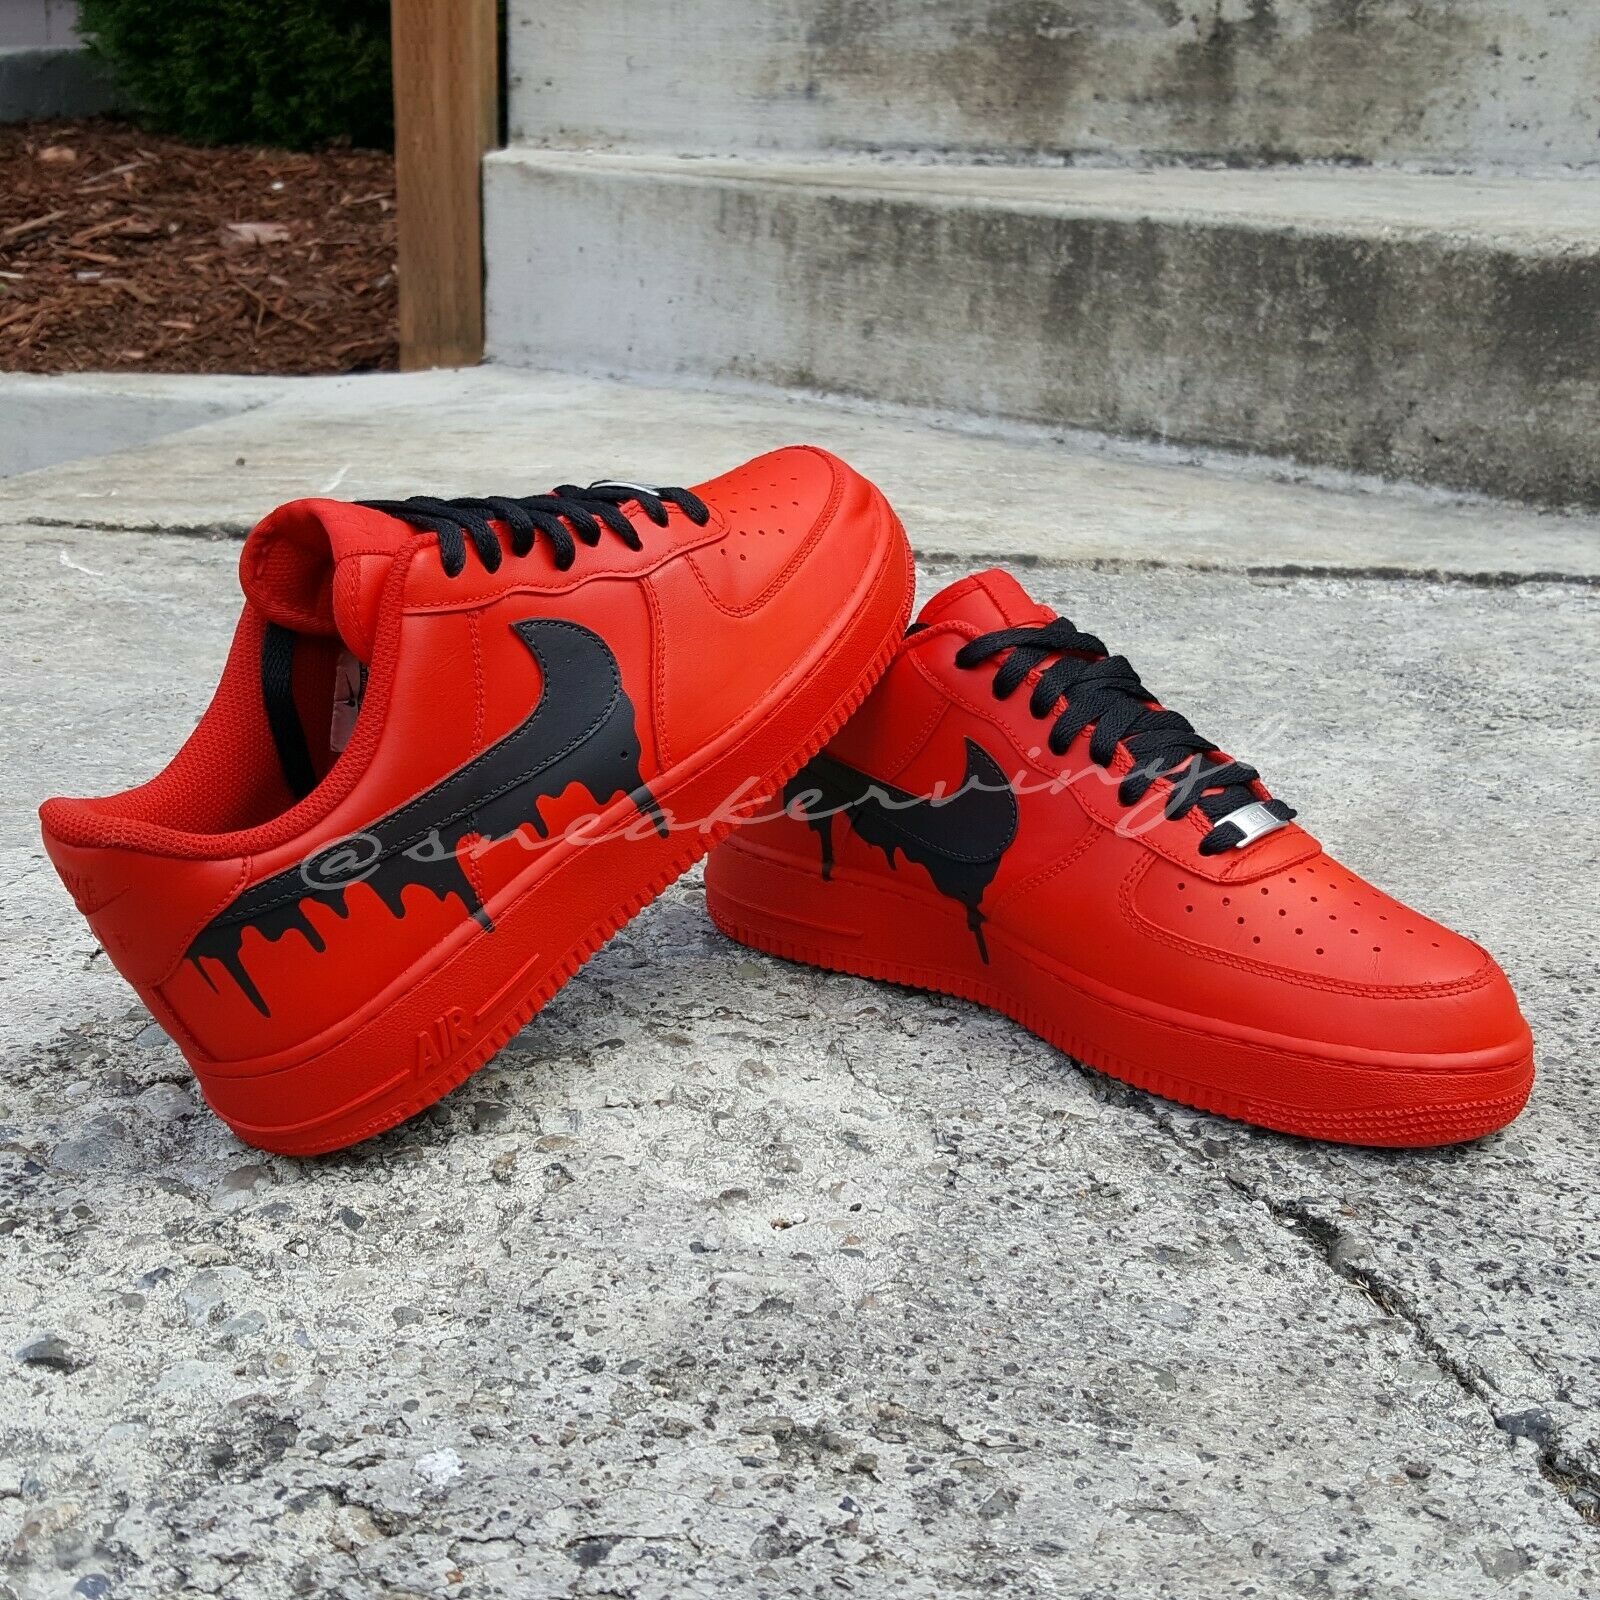 Air Force 1 Custom Low Drip Red Shoes Black Drip & Laces All Sizes Men Women Kids Af1 Sneakers 17 Mens (18.5 Women's)